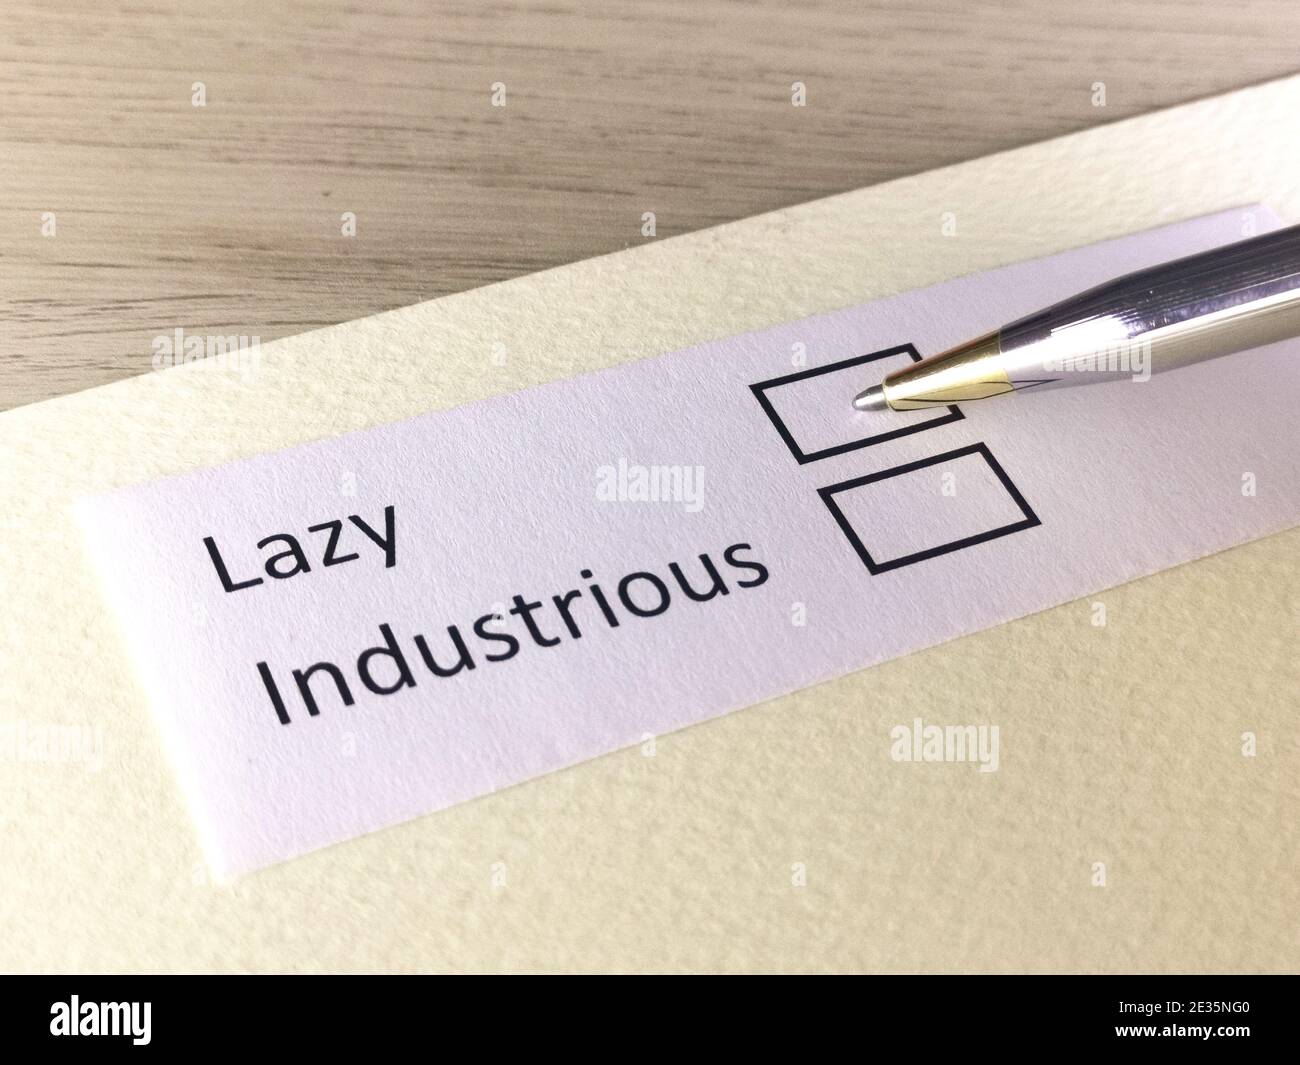 One person is answering question on a piece of paper. The person is thinking to be lazy or to be industrious. Stock Photo